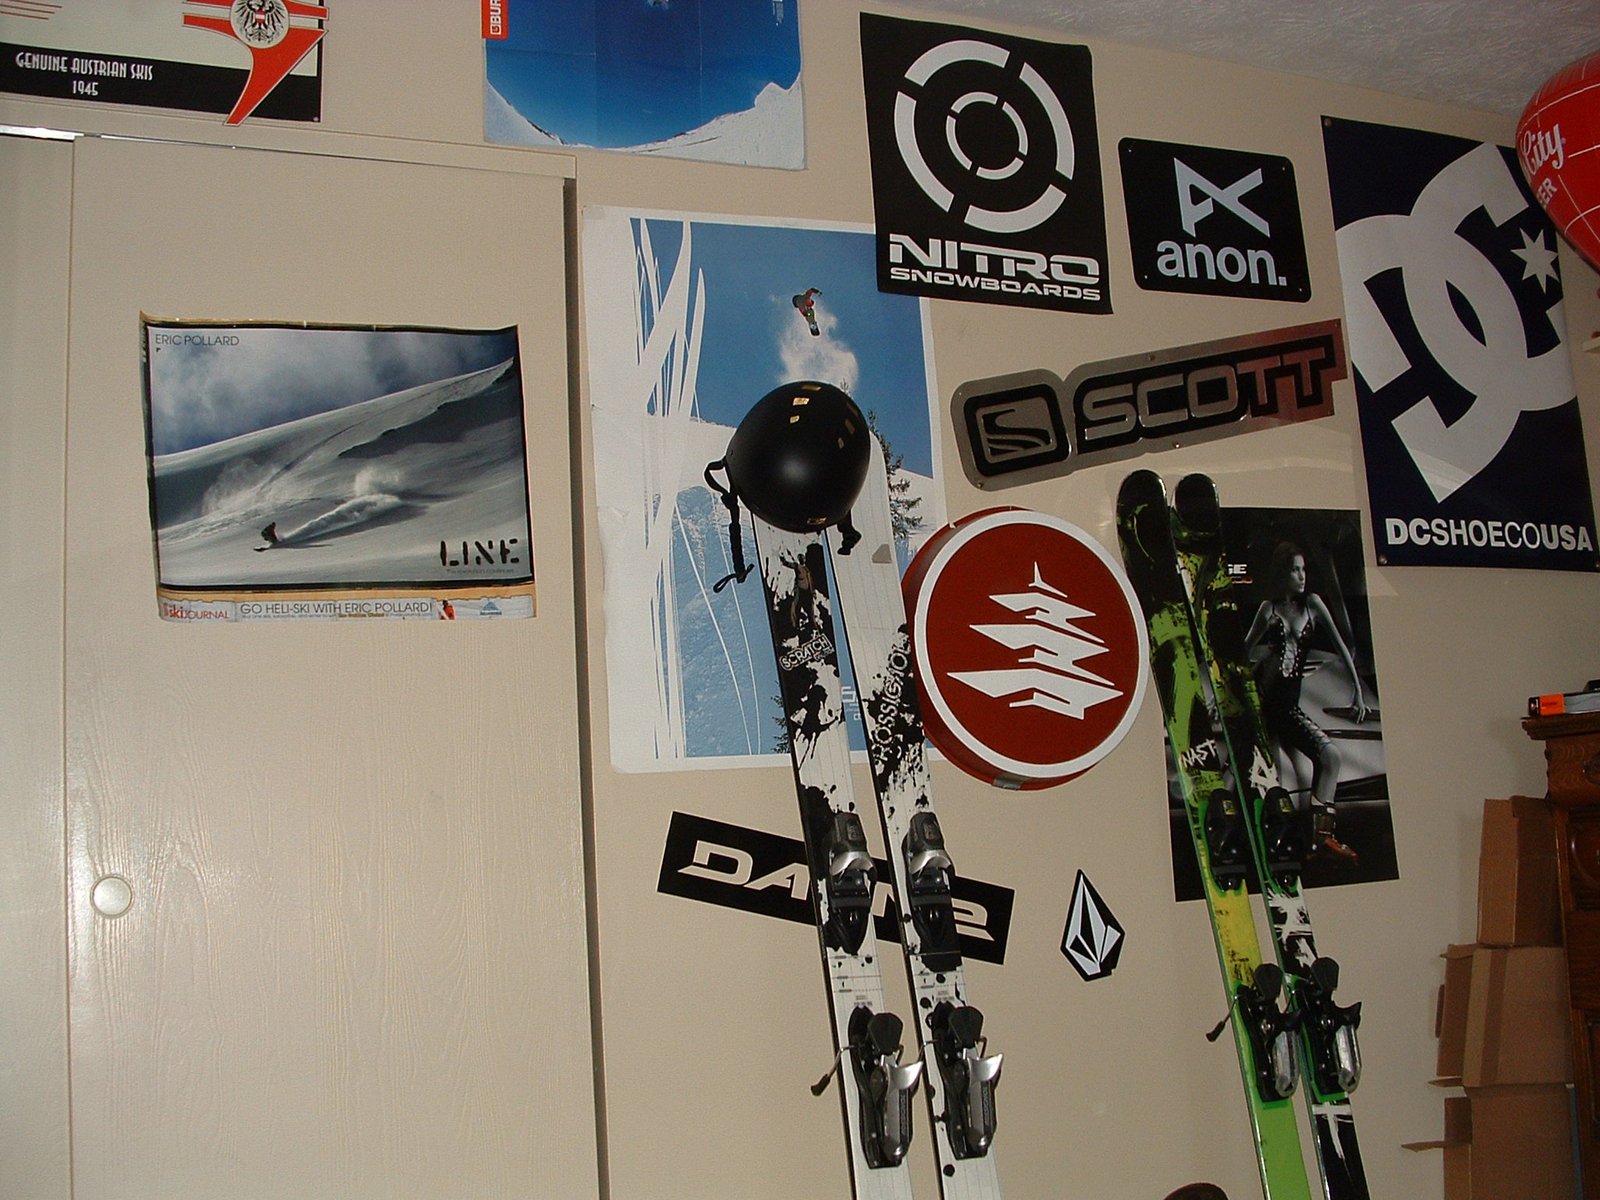 Skis and posters